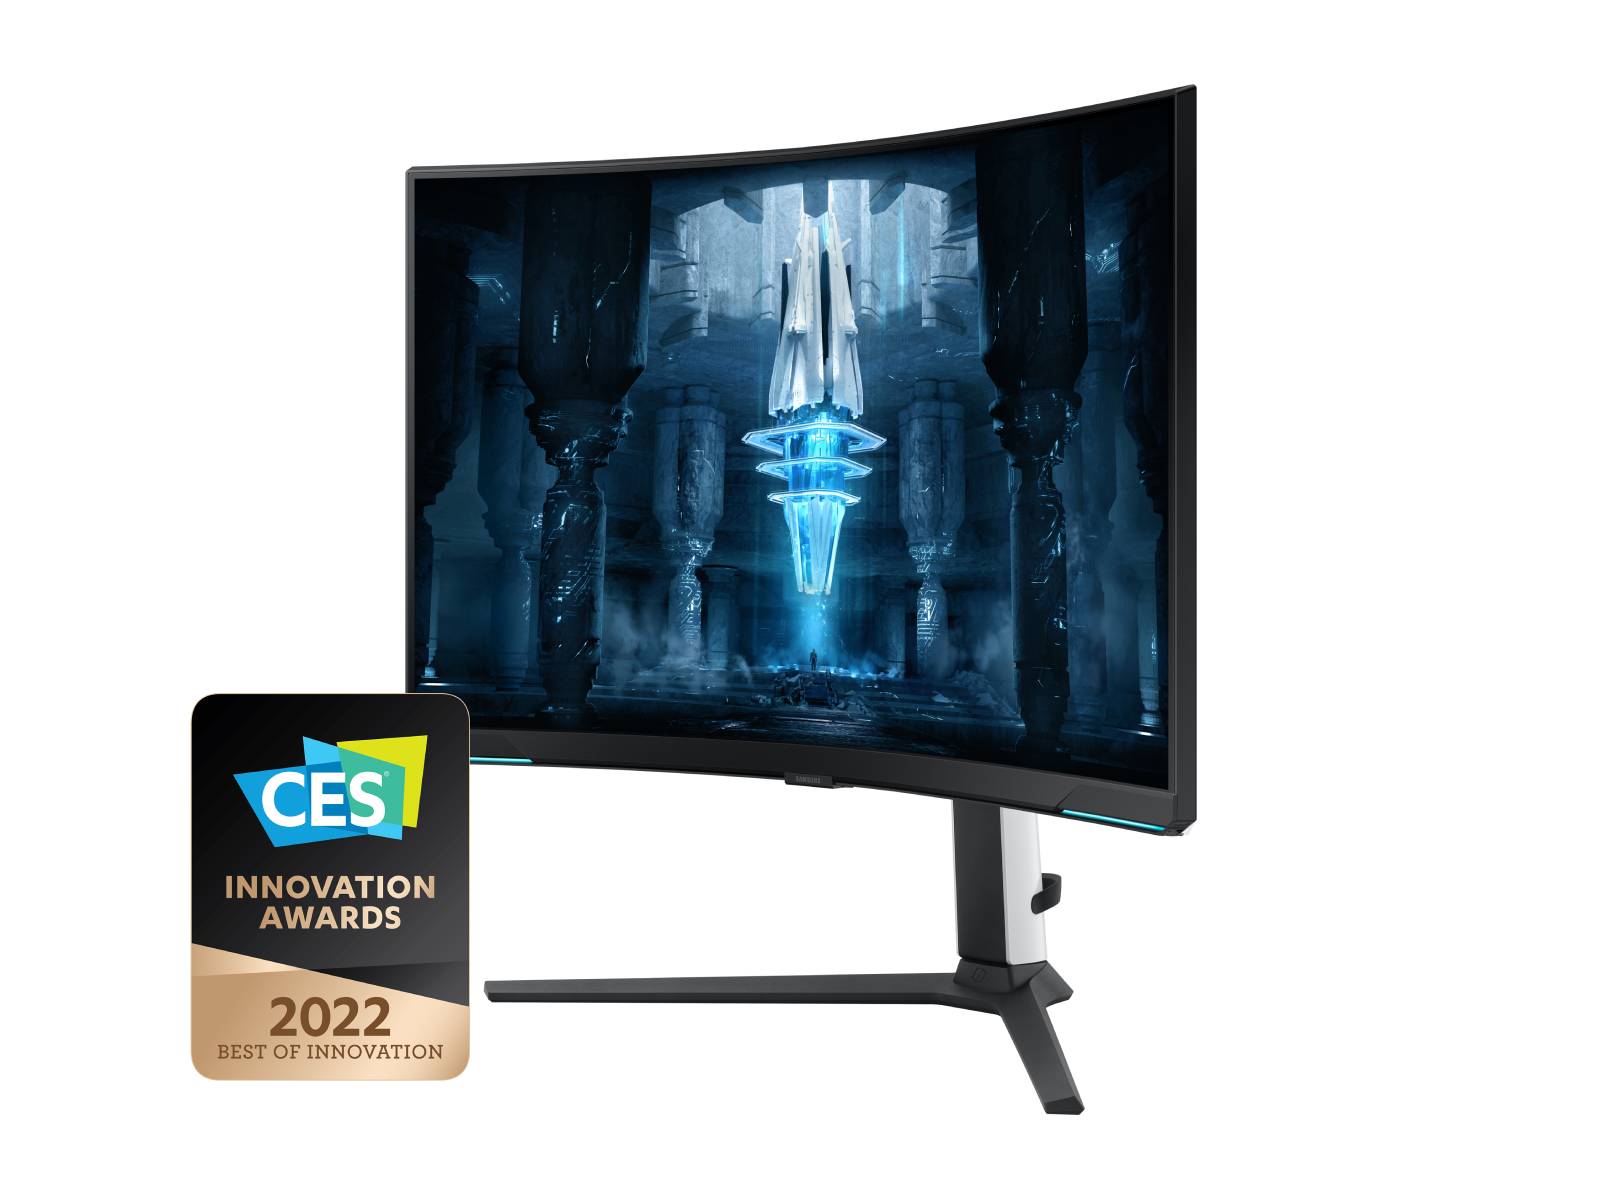 32 Odyssey Neo G8 4K UHD 240Hz 1ms(GtG) Quantum HDR2000 Curved